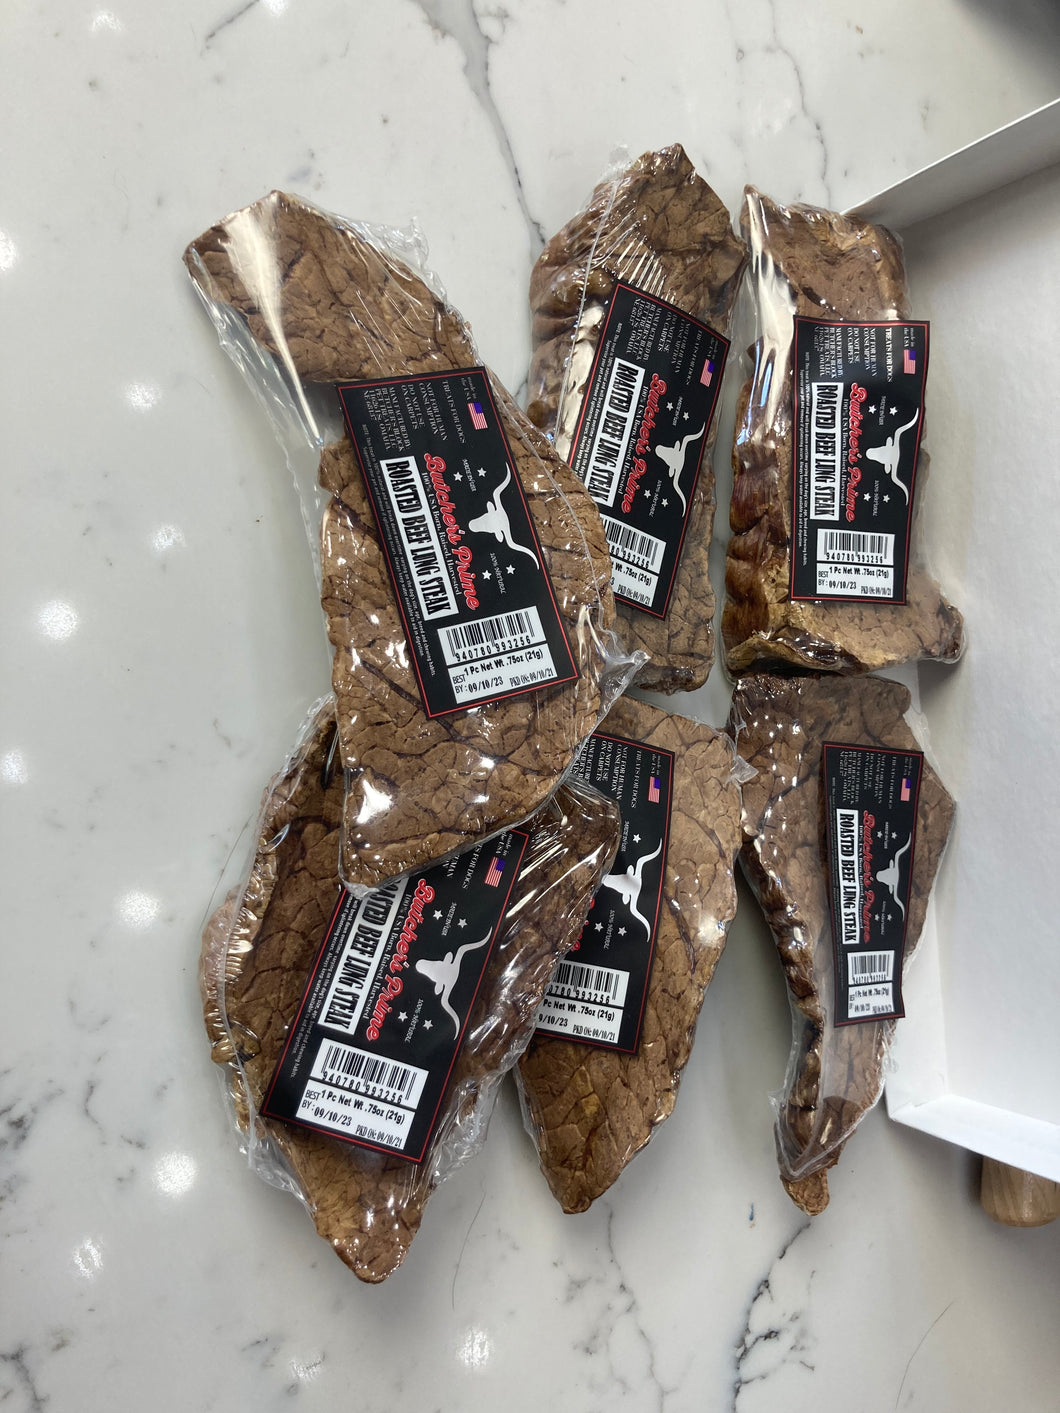 Butcher's Prime Roasted Beef Lung Steak- For All dogs and Cats